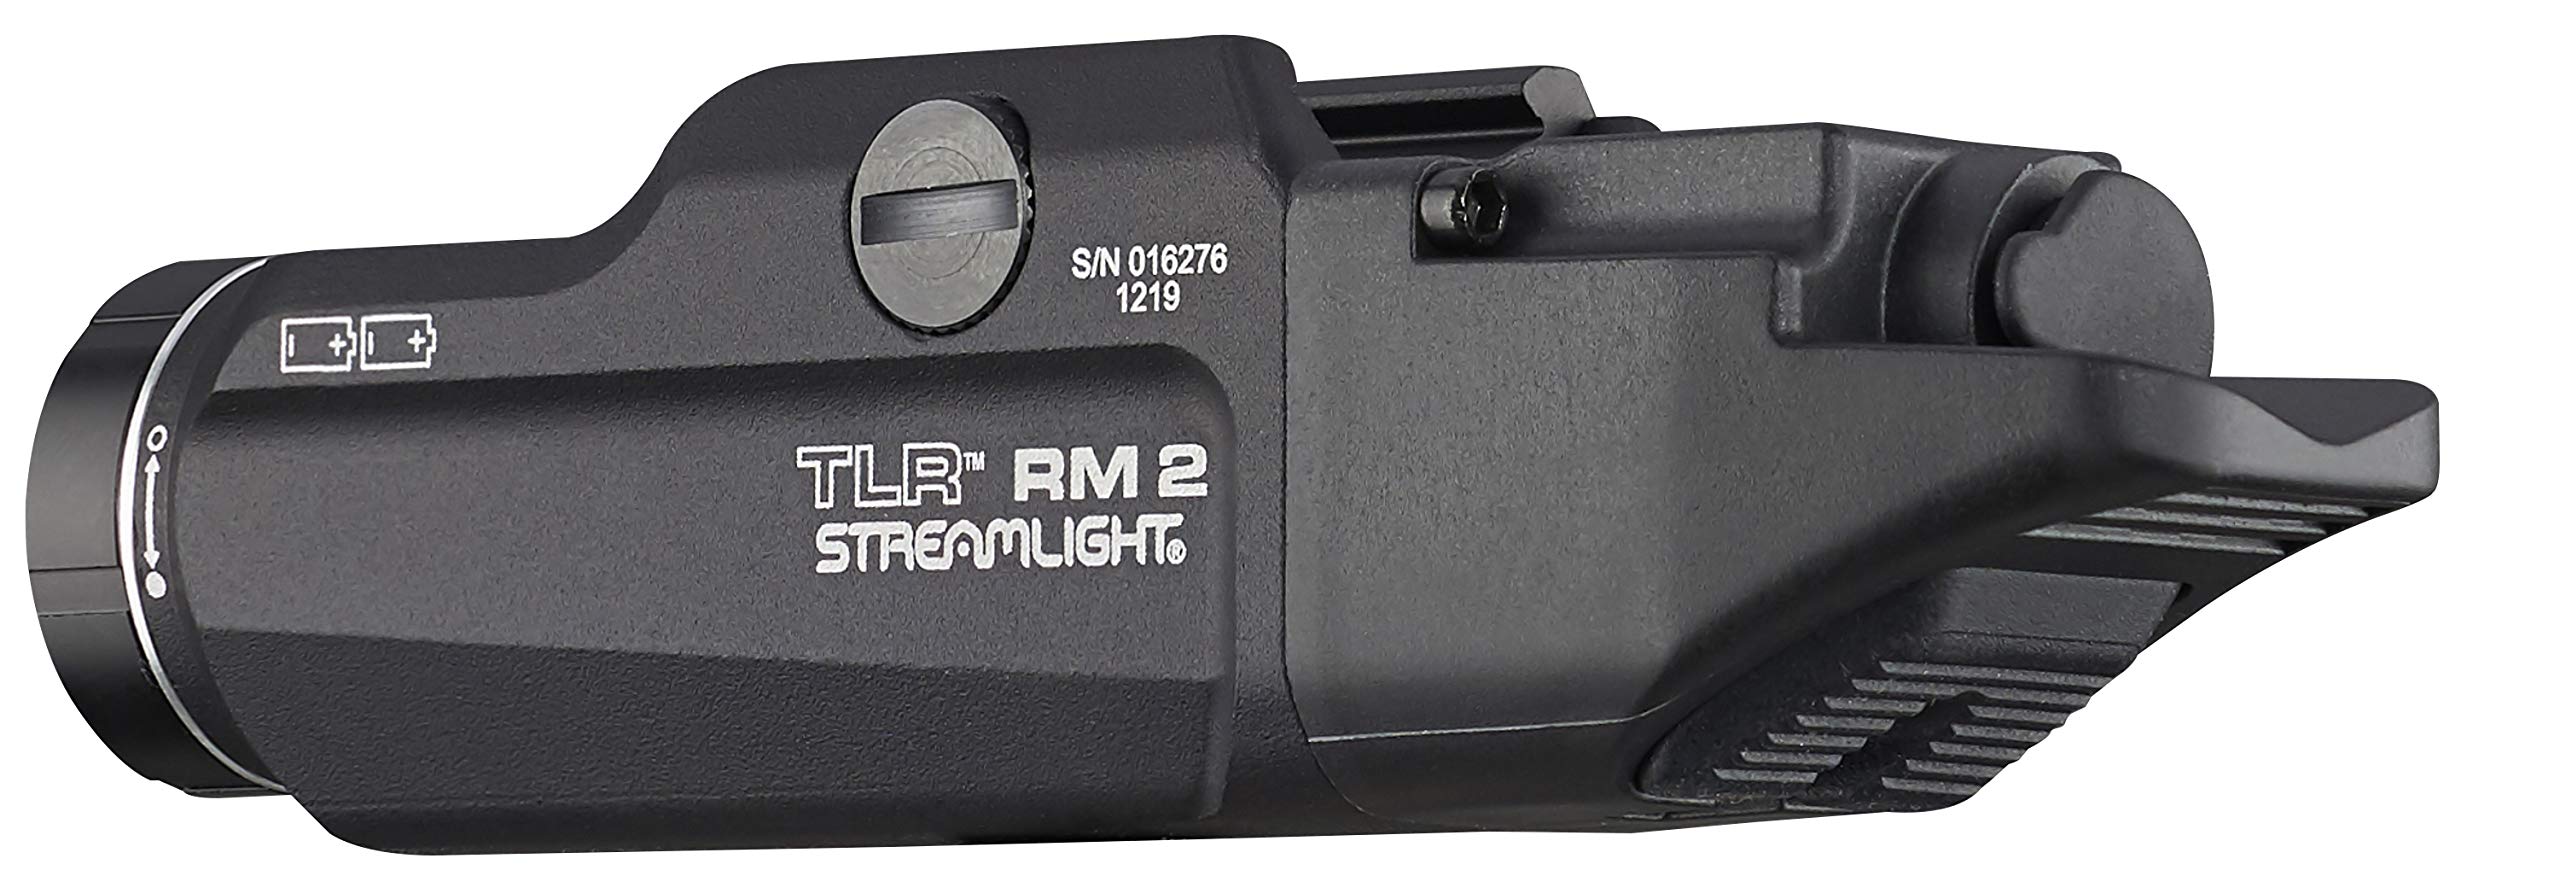 Streamlight 69451 TLR RM 2 Compact Rail-Mounted Tactical Lighting System with Rail Locating Keys and Two Lithium Batteries, Black